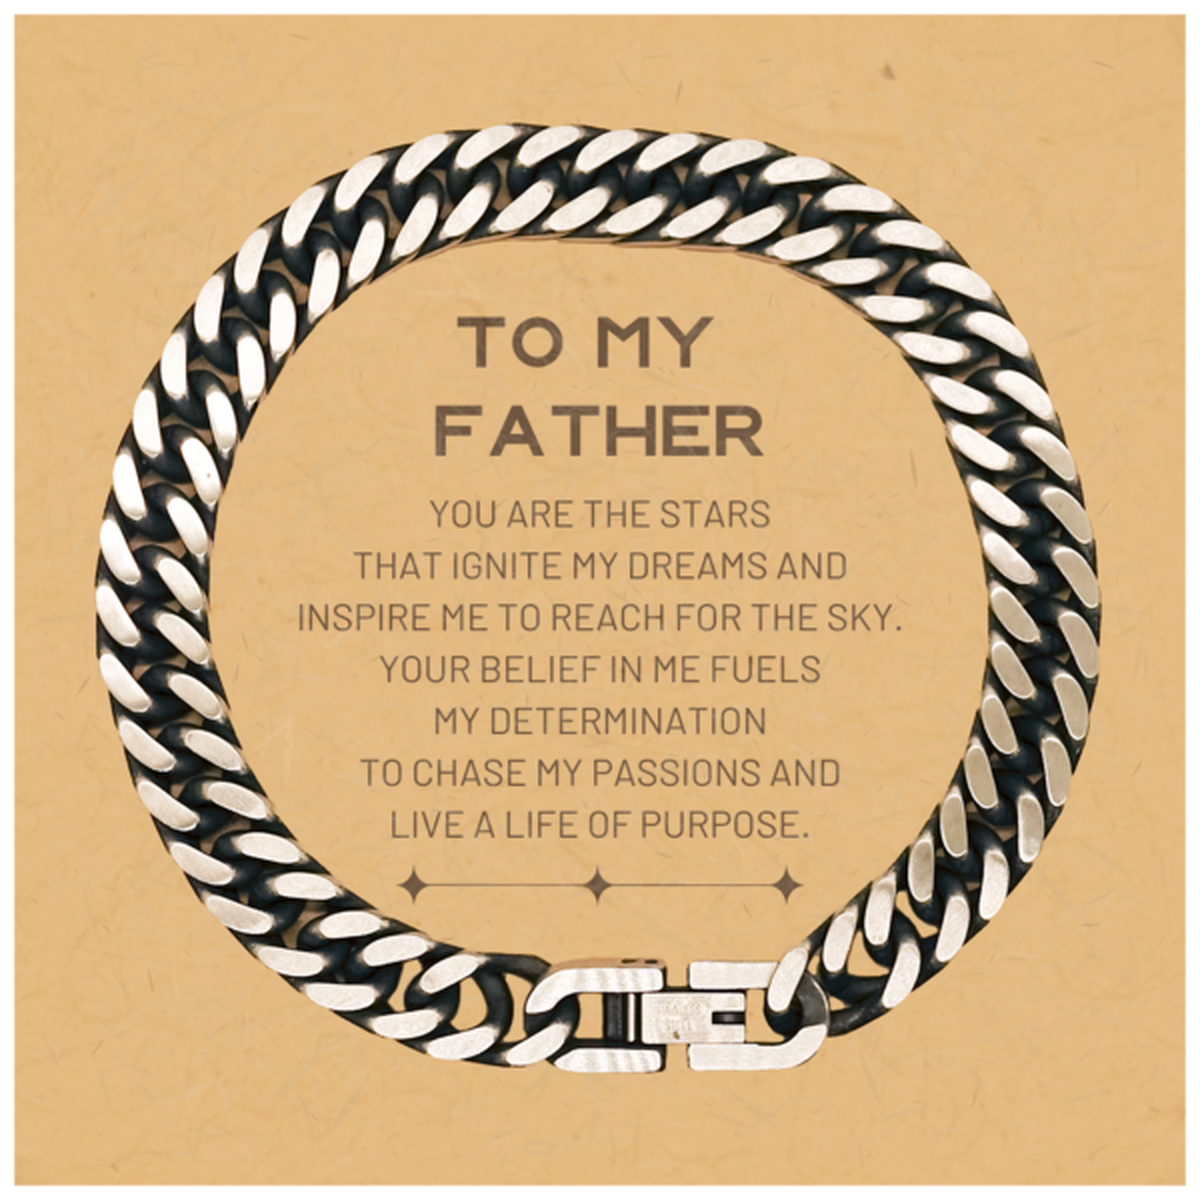 To My Father Cuban Link Chain Bracelet, You are the stars that ignite my dreams and inspire me to reach for the sky, Birthday Christmas Unique Gifts For Father, Thank You Gifts For Father